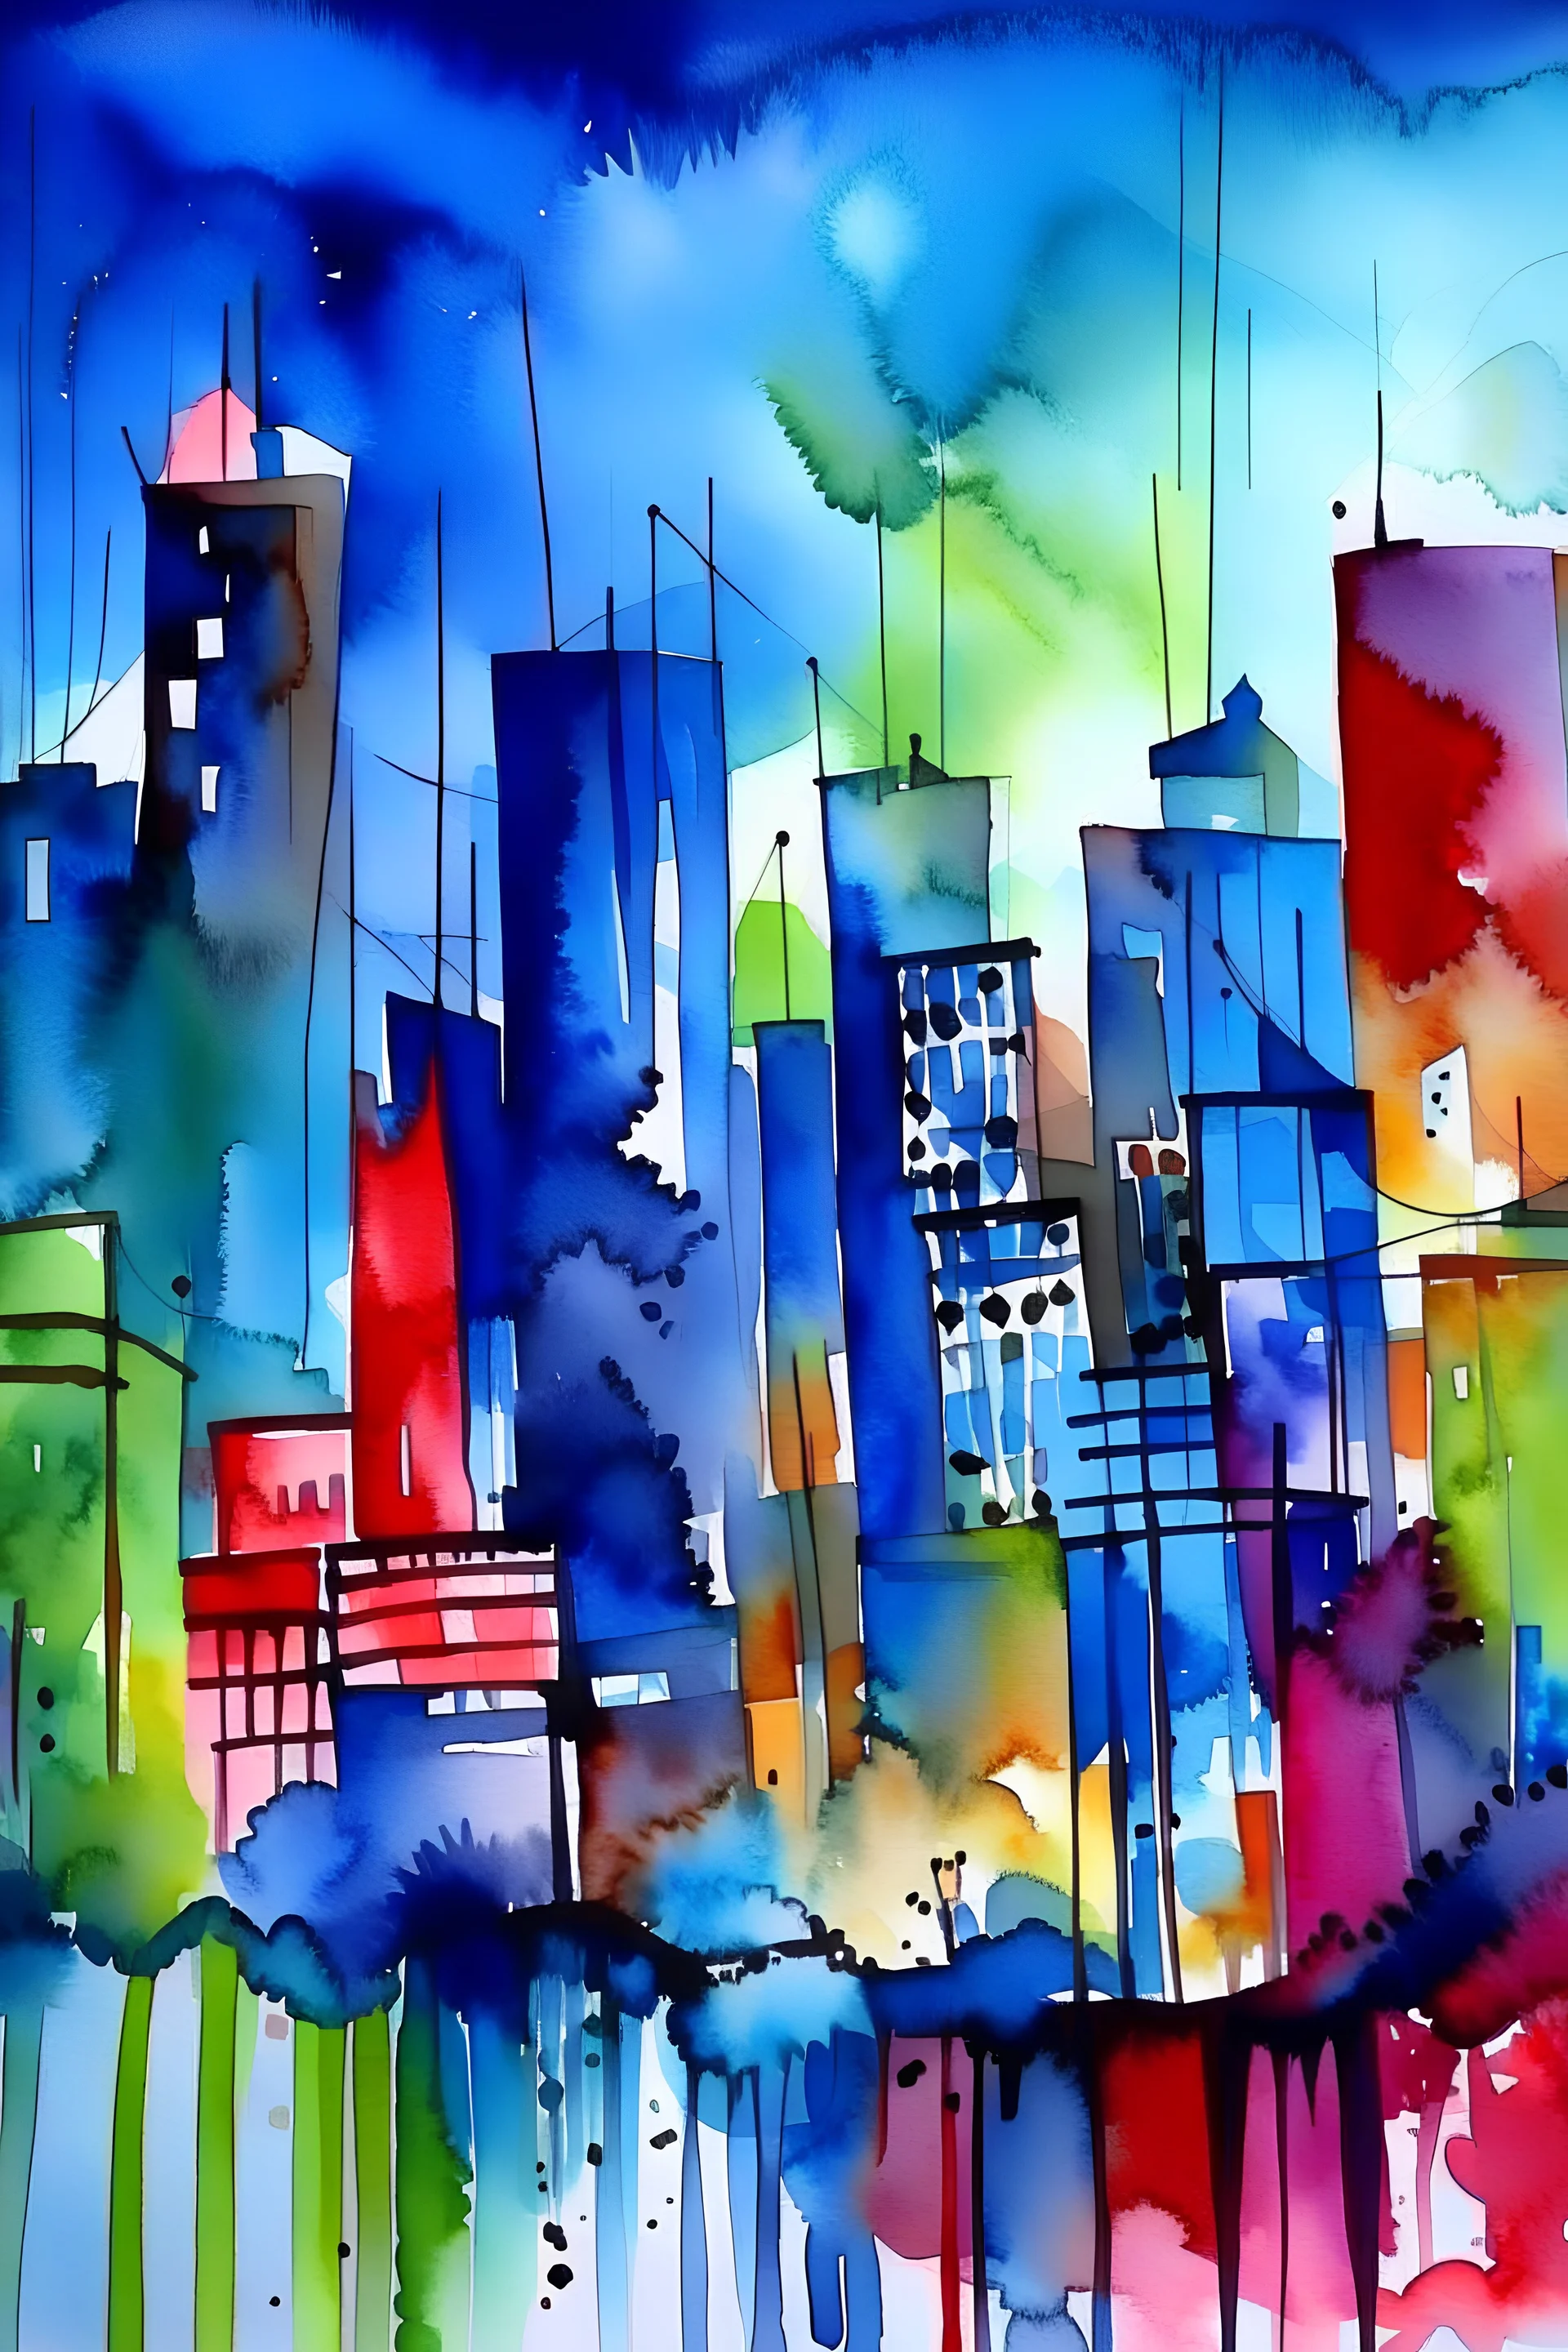 Watercolor, abstract, impressionist, not much detail patterns: Delight in the energy of a city skyline at night, with abstract forms capturing the dynamic and vibrant nature of urban life in a captivating composition.